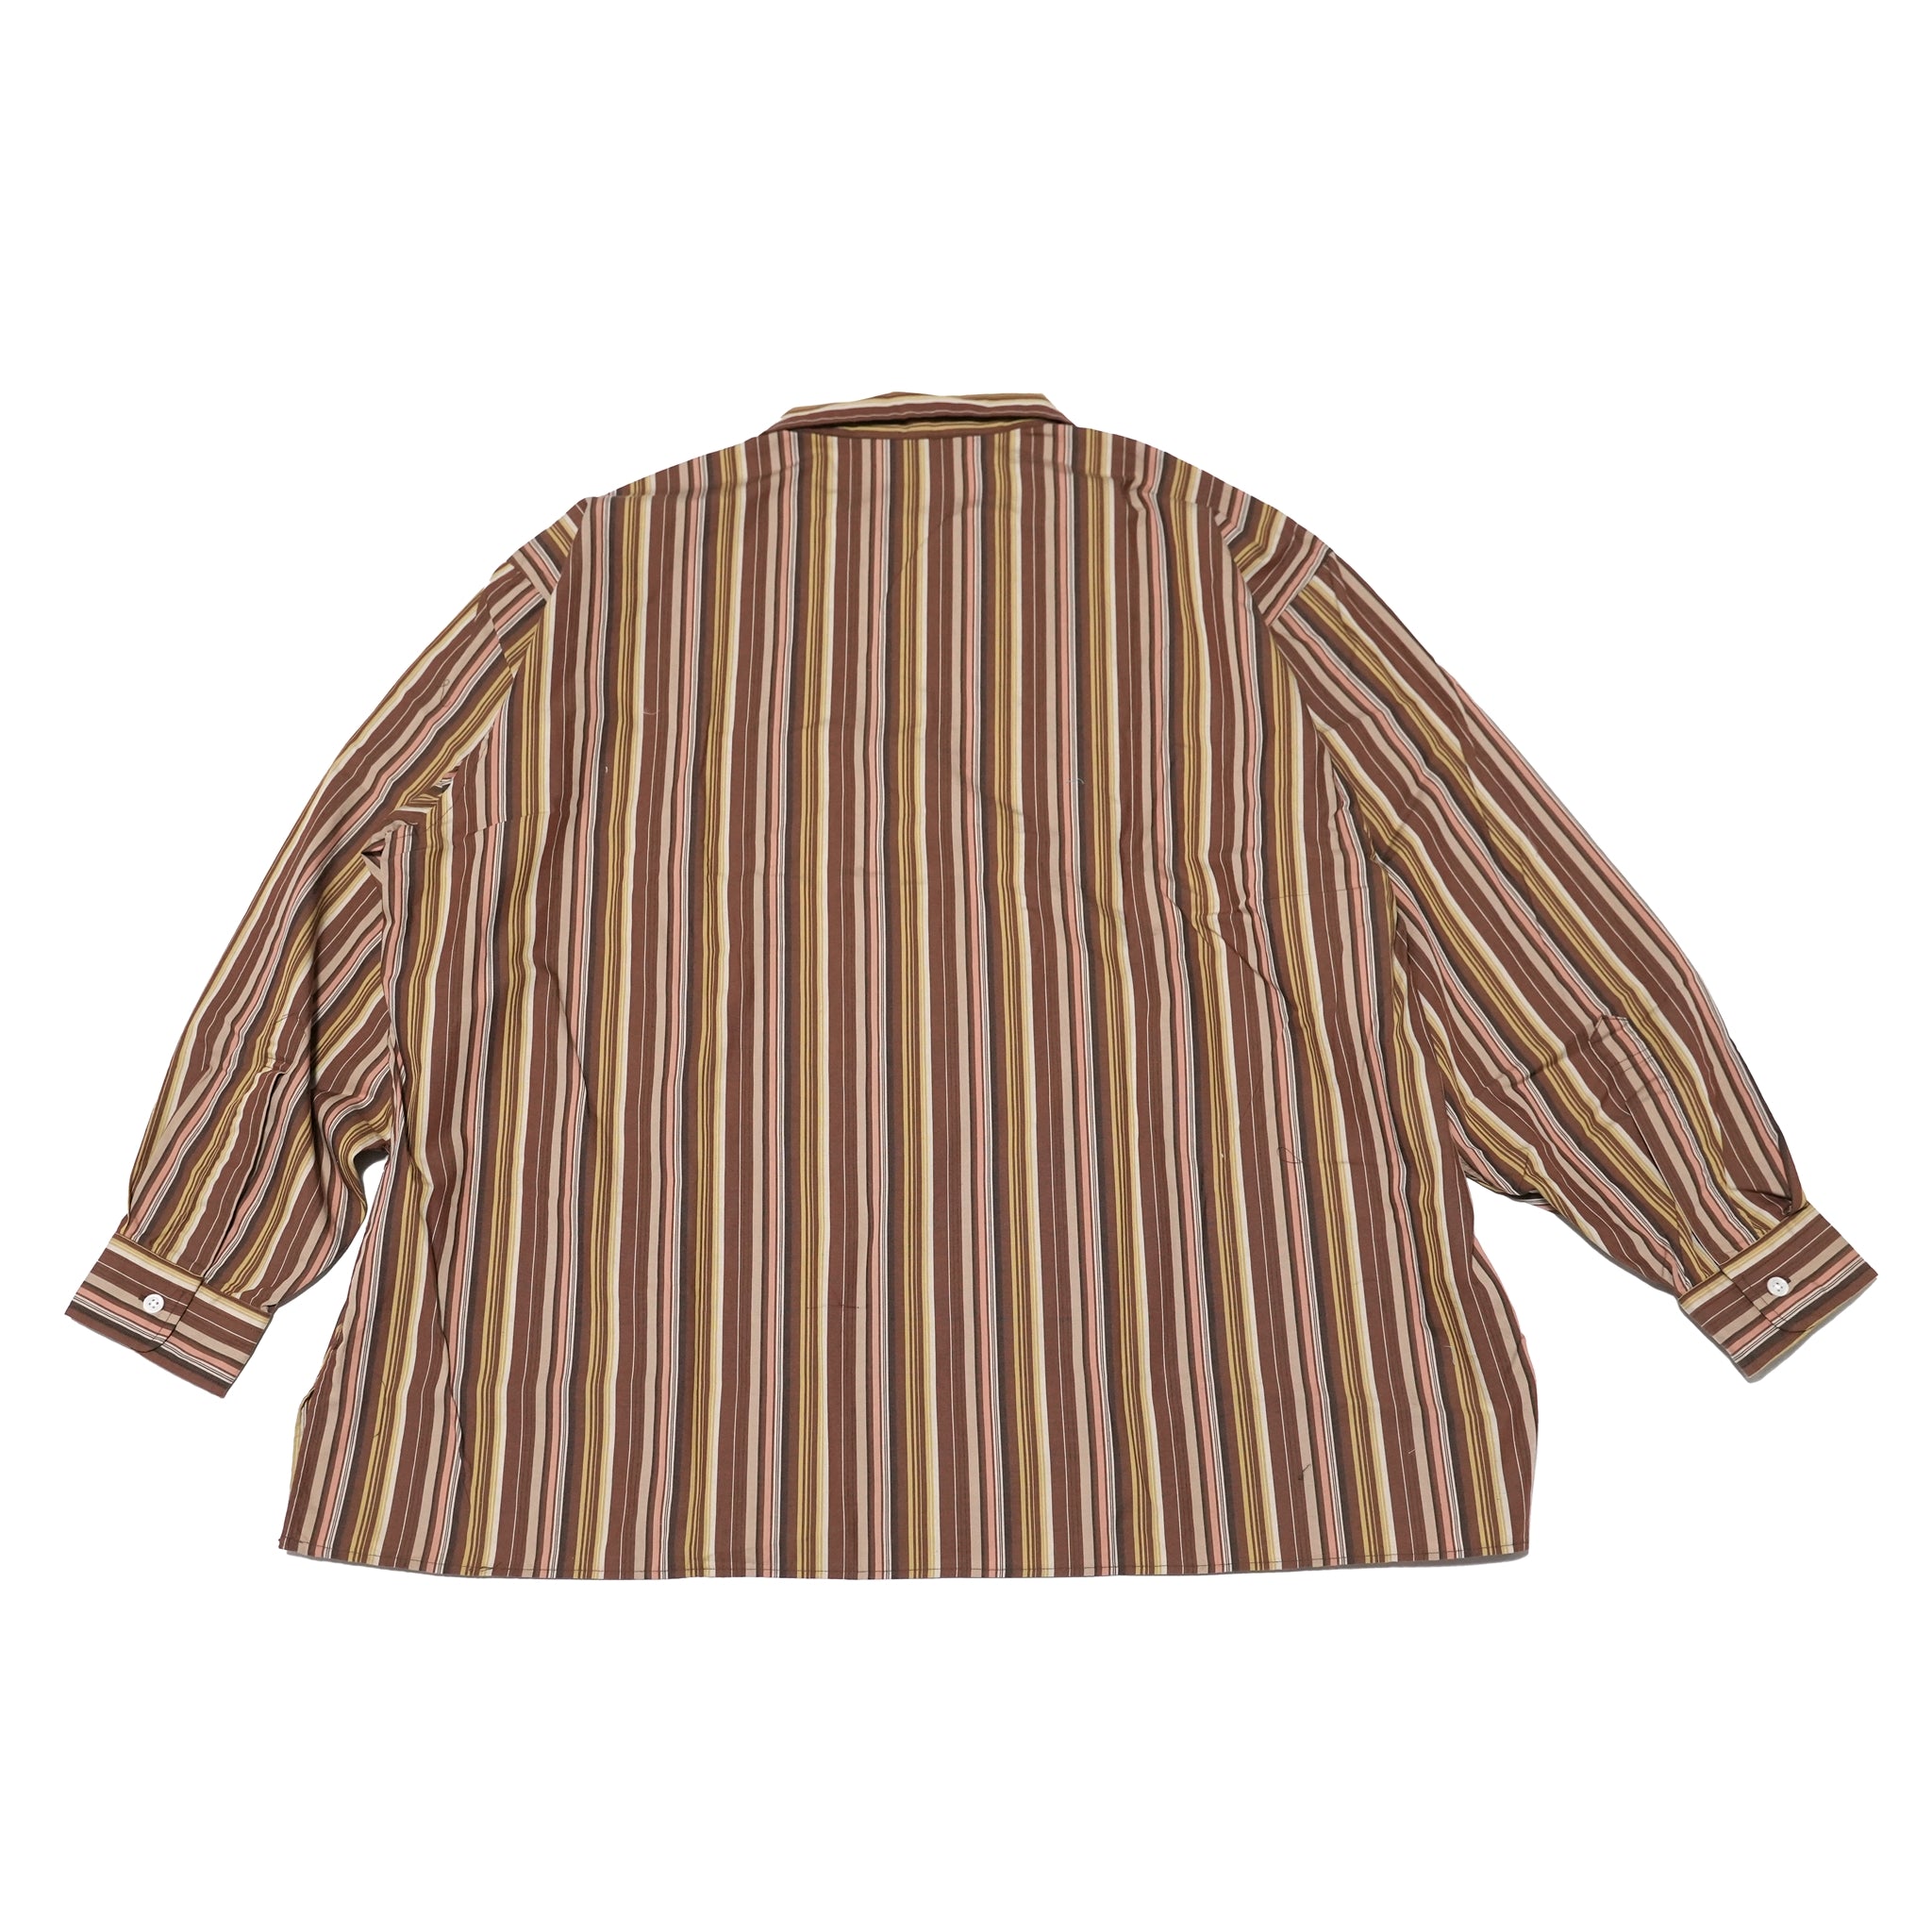 Name:CAMP COLLAR SHIRT | Color:MULTI STRIPE | Size:Regular/Tall【CITYLIGHTS PRODUCTS_シティライツプロダクツ】